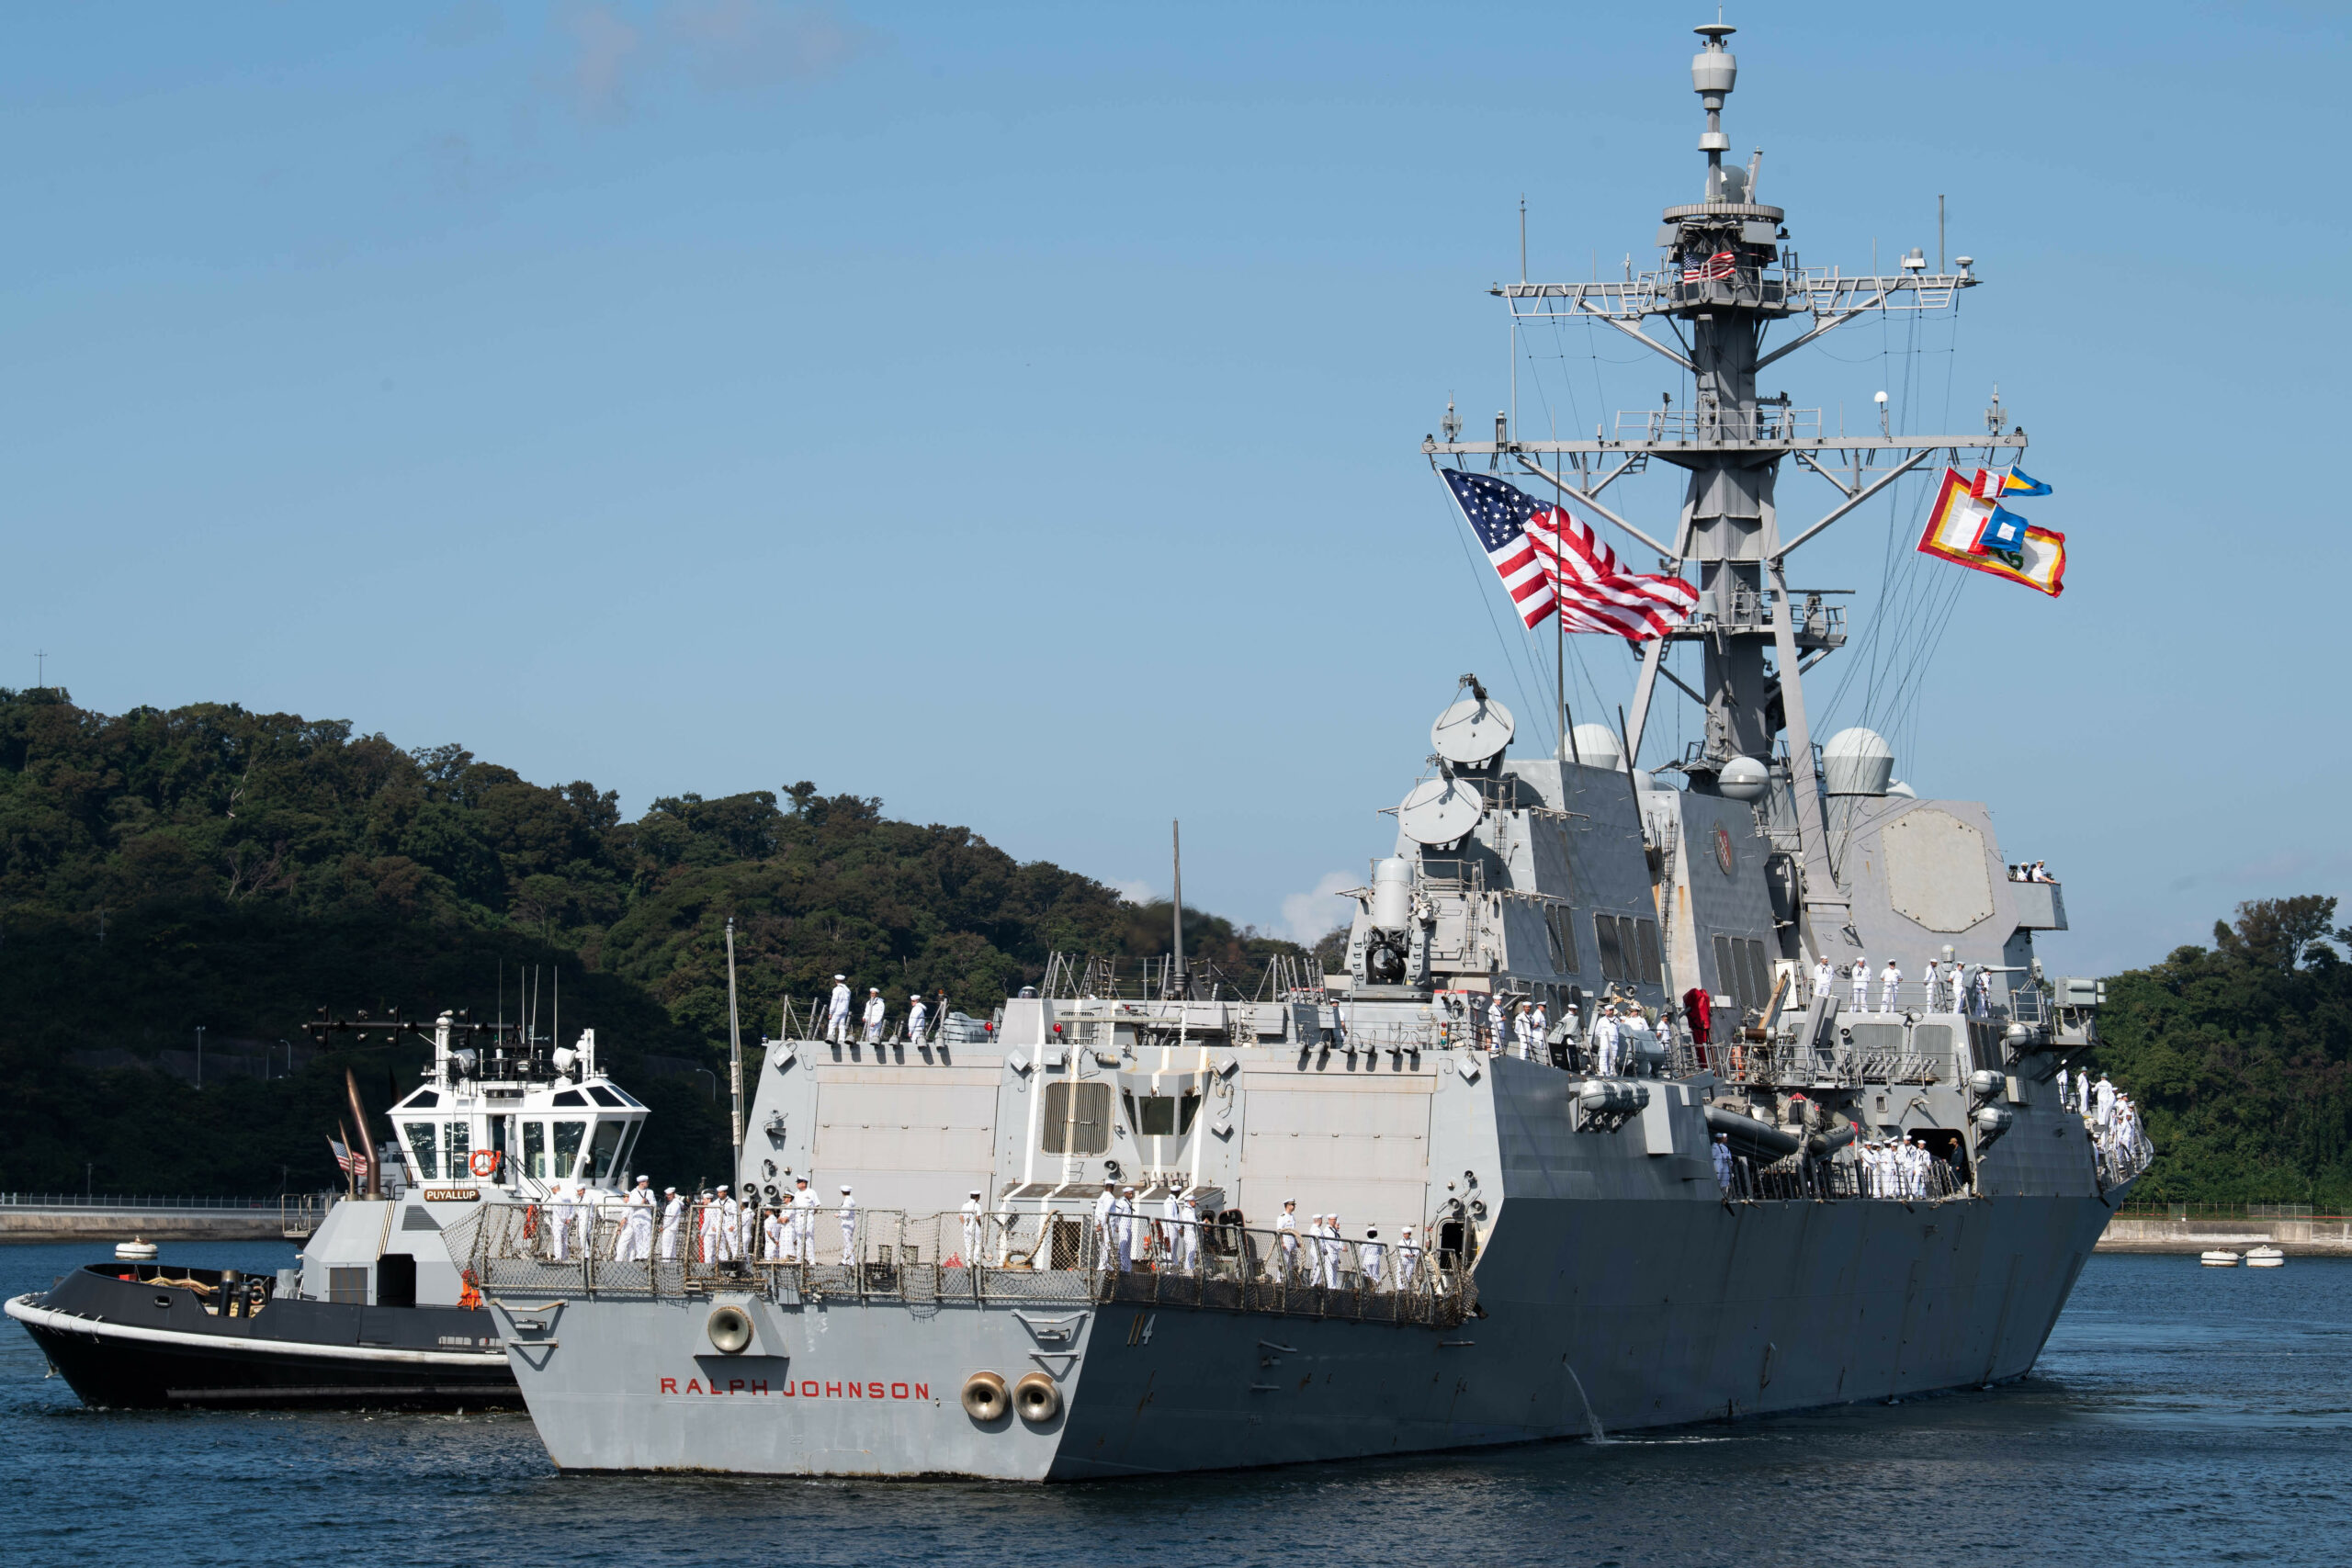 The Arleigh Burke-class guided-missile destroyer USS Ralph Johnson